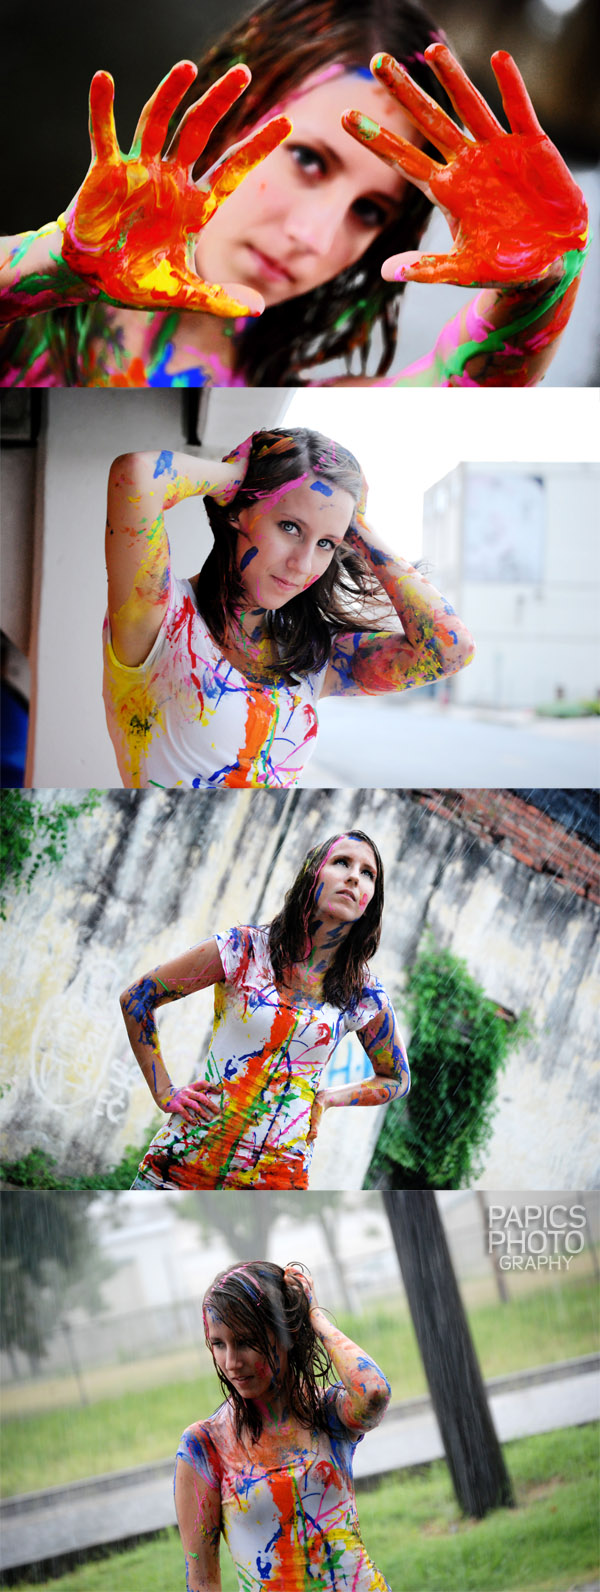 Female model photo shoot of Papics Photography  in Lake Charles